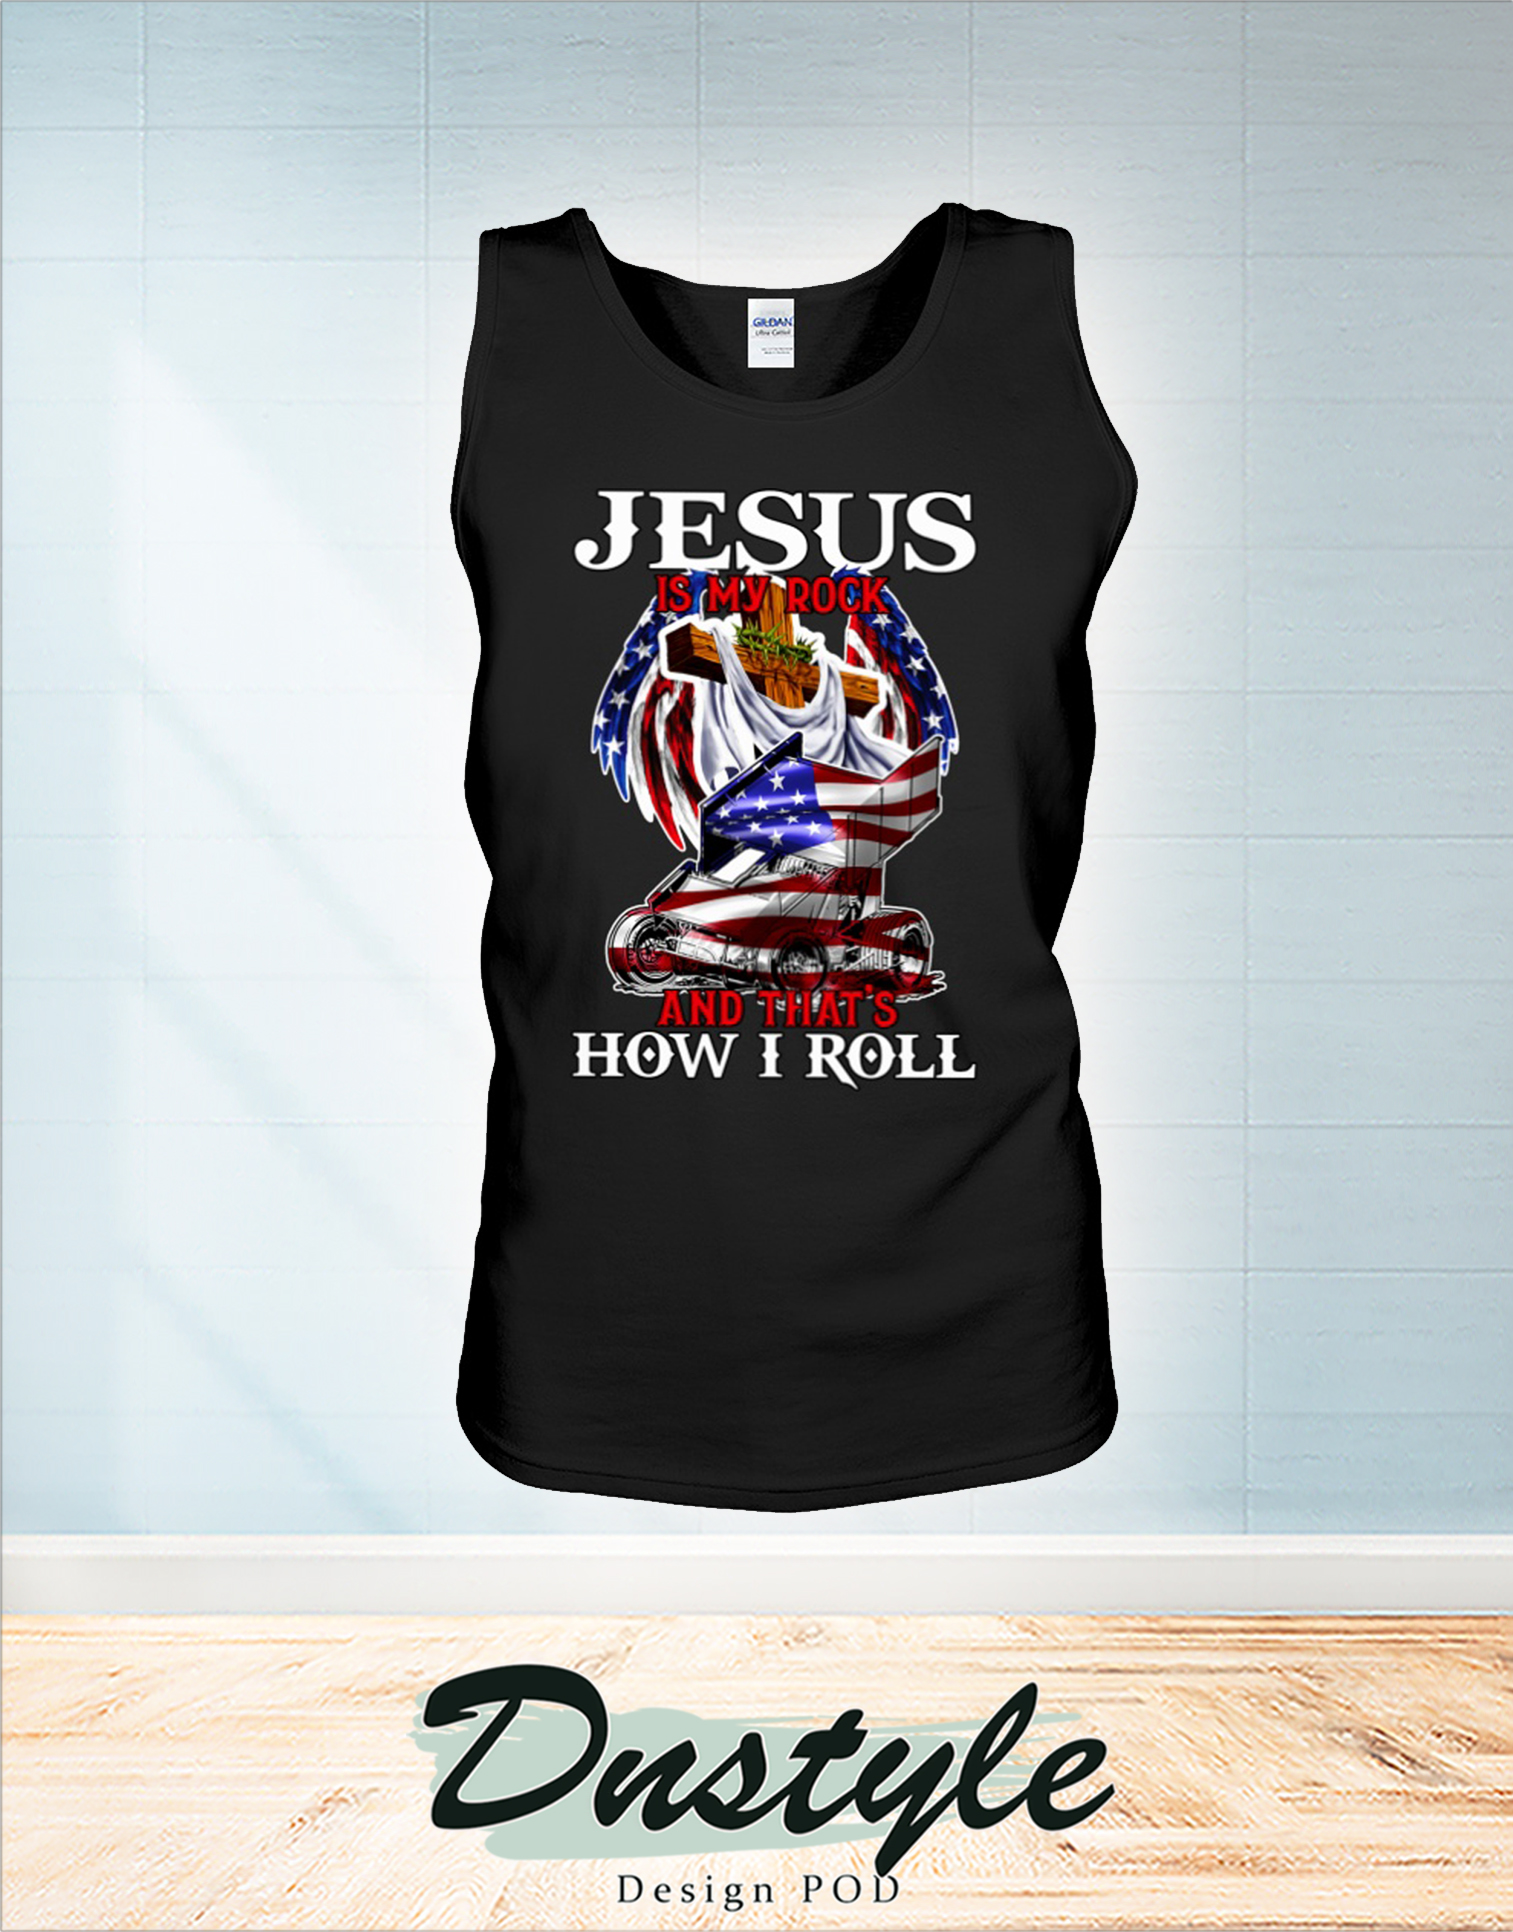 Sprint car jesus is my rock and that's how I roll tank